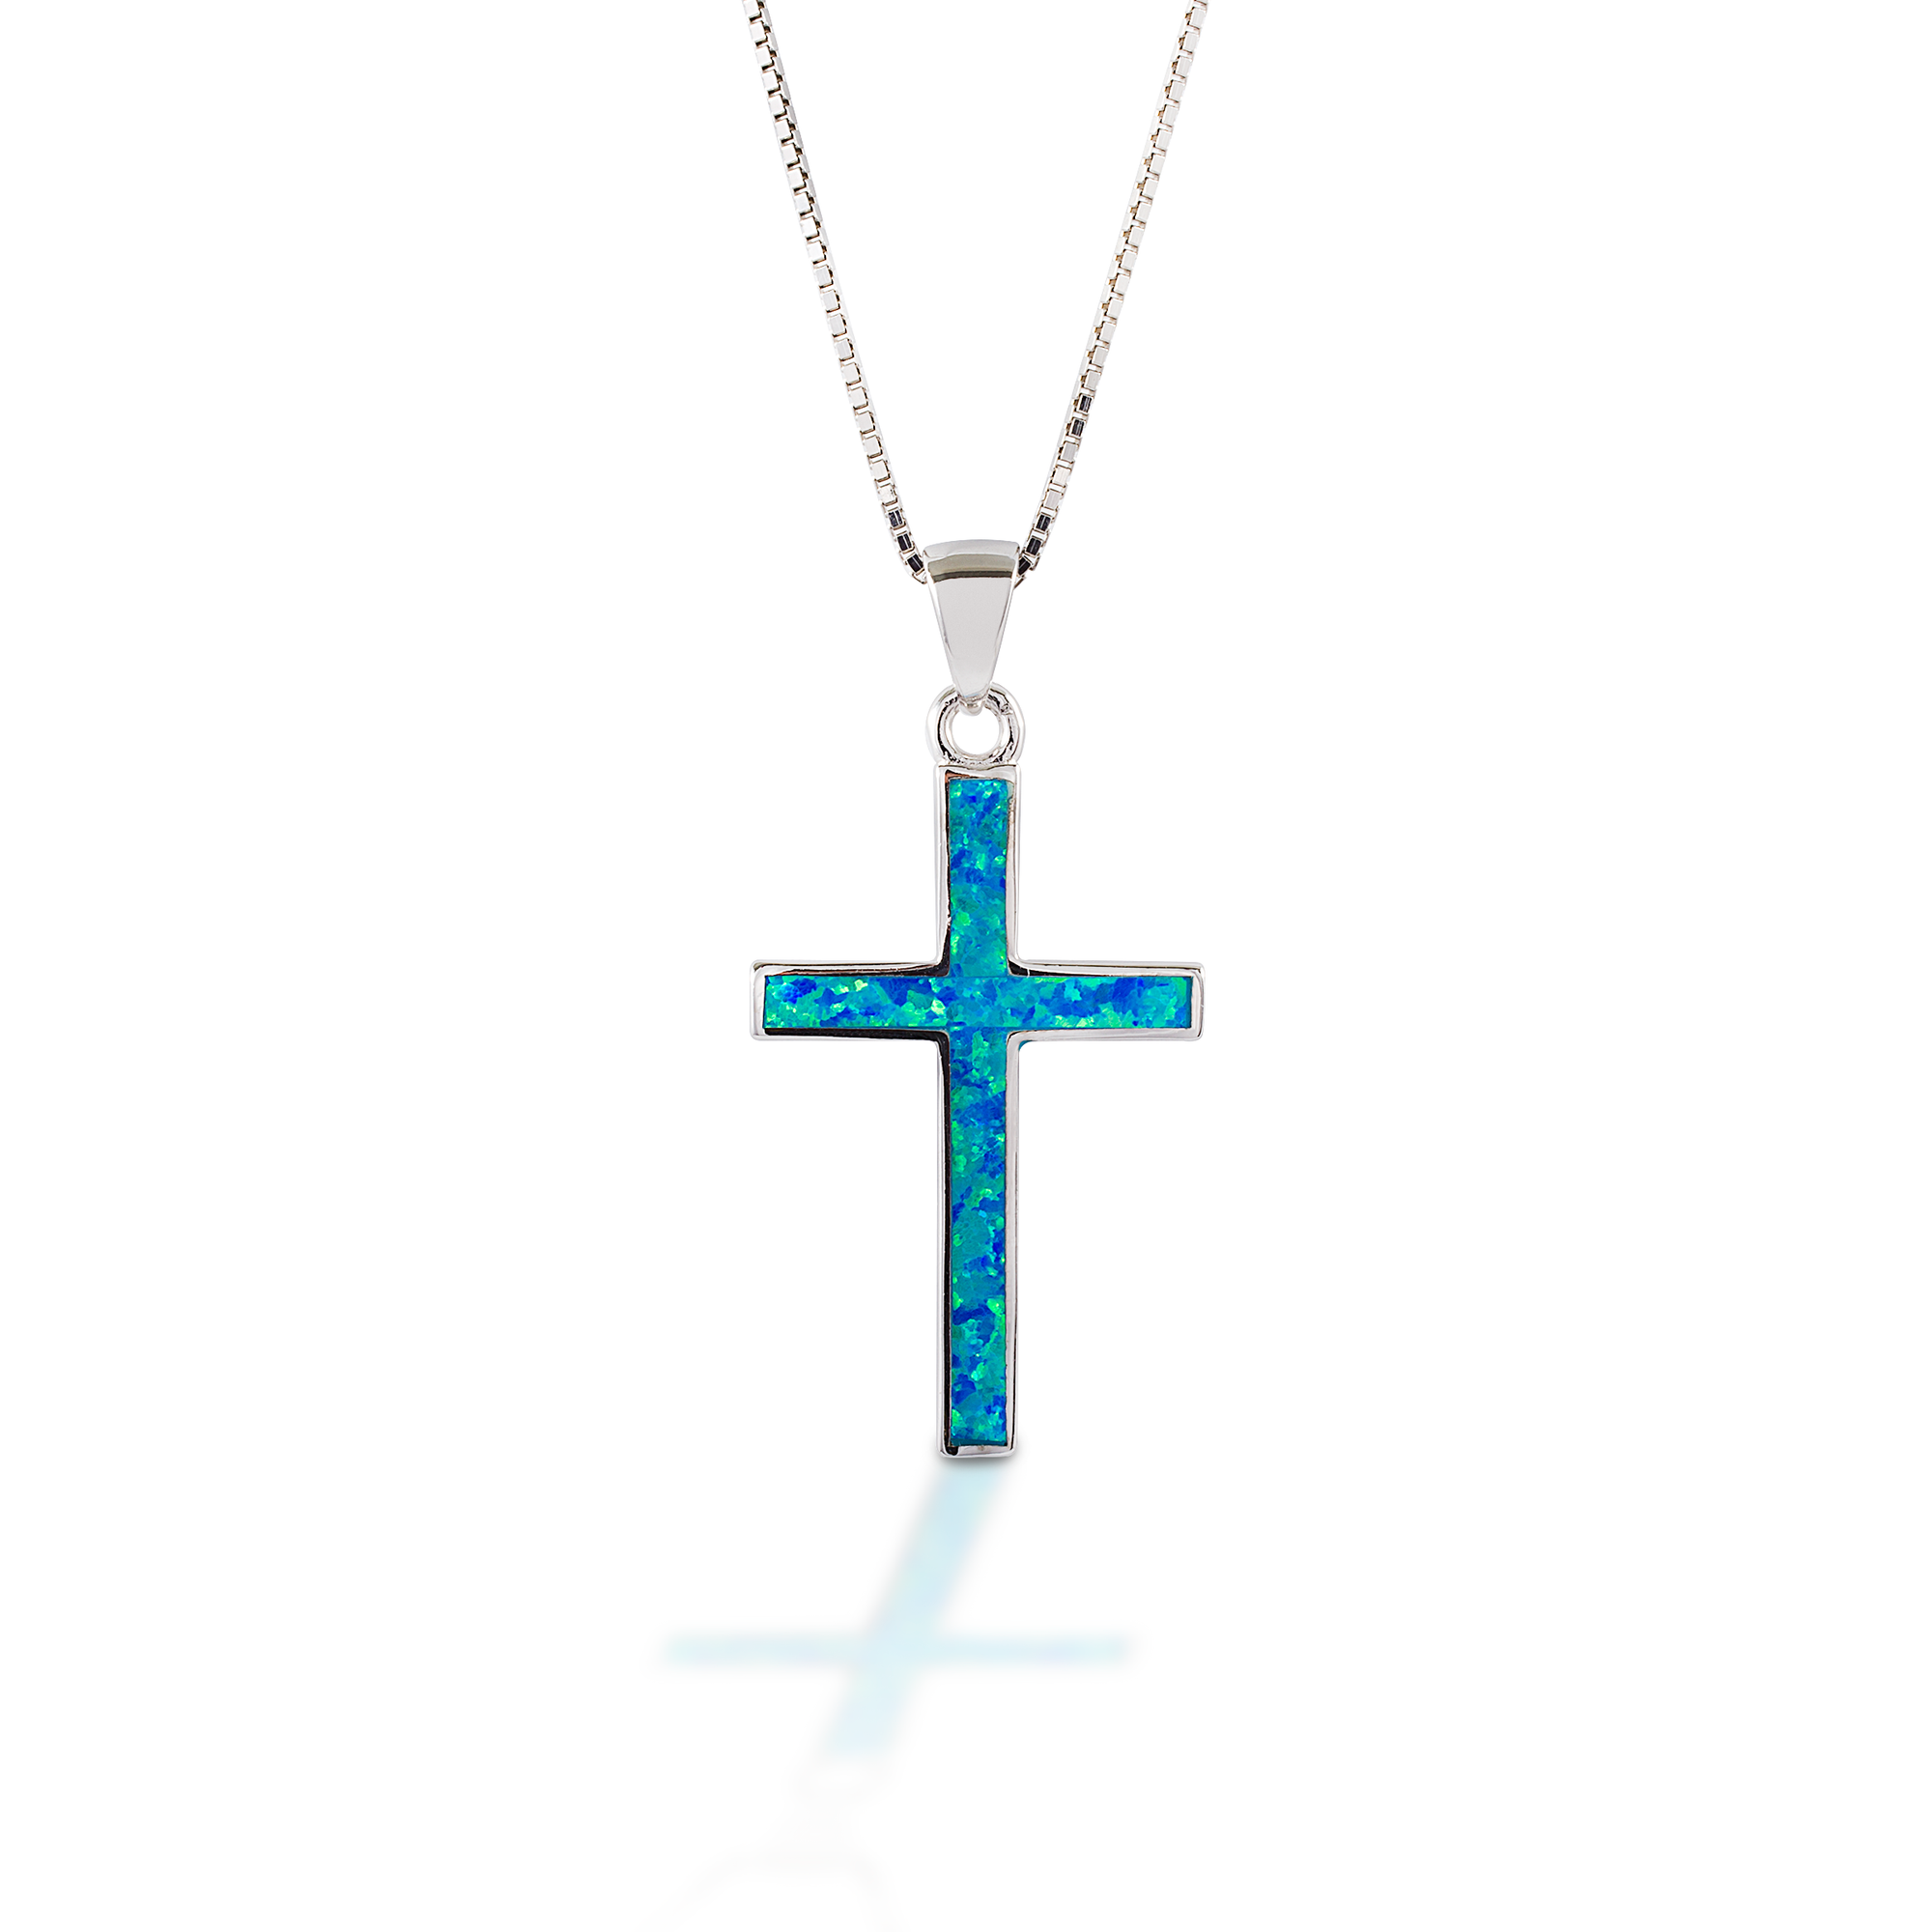 Sometimes simple is better! The Kelly Herd Blue Opal Cross Necklace has a clean lined cross pendant inlaid with blue opal. Light, bright, and lovely!  Features      Cross pendant     Sterling silver     Inlaid with opal     Adjustable 16-18"     32mm x 18mm